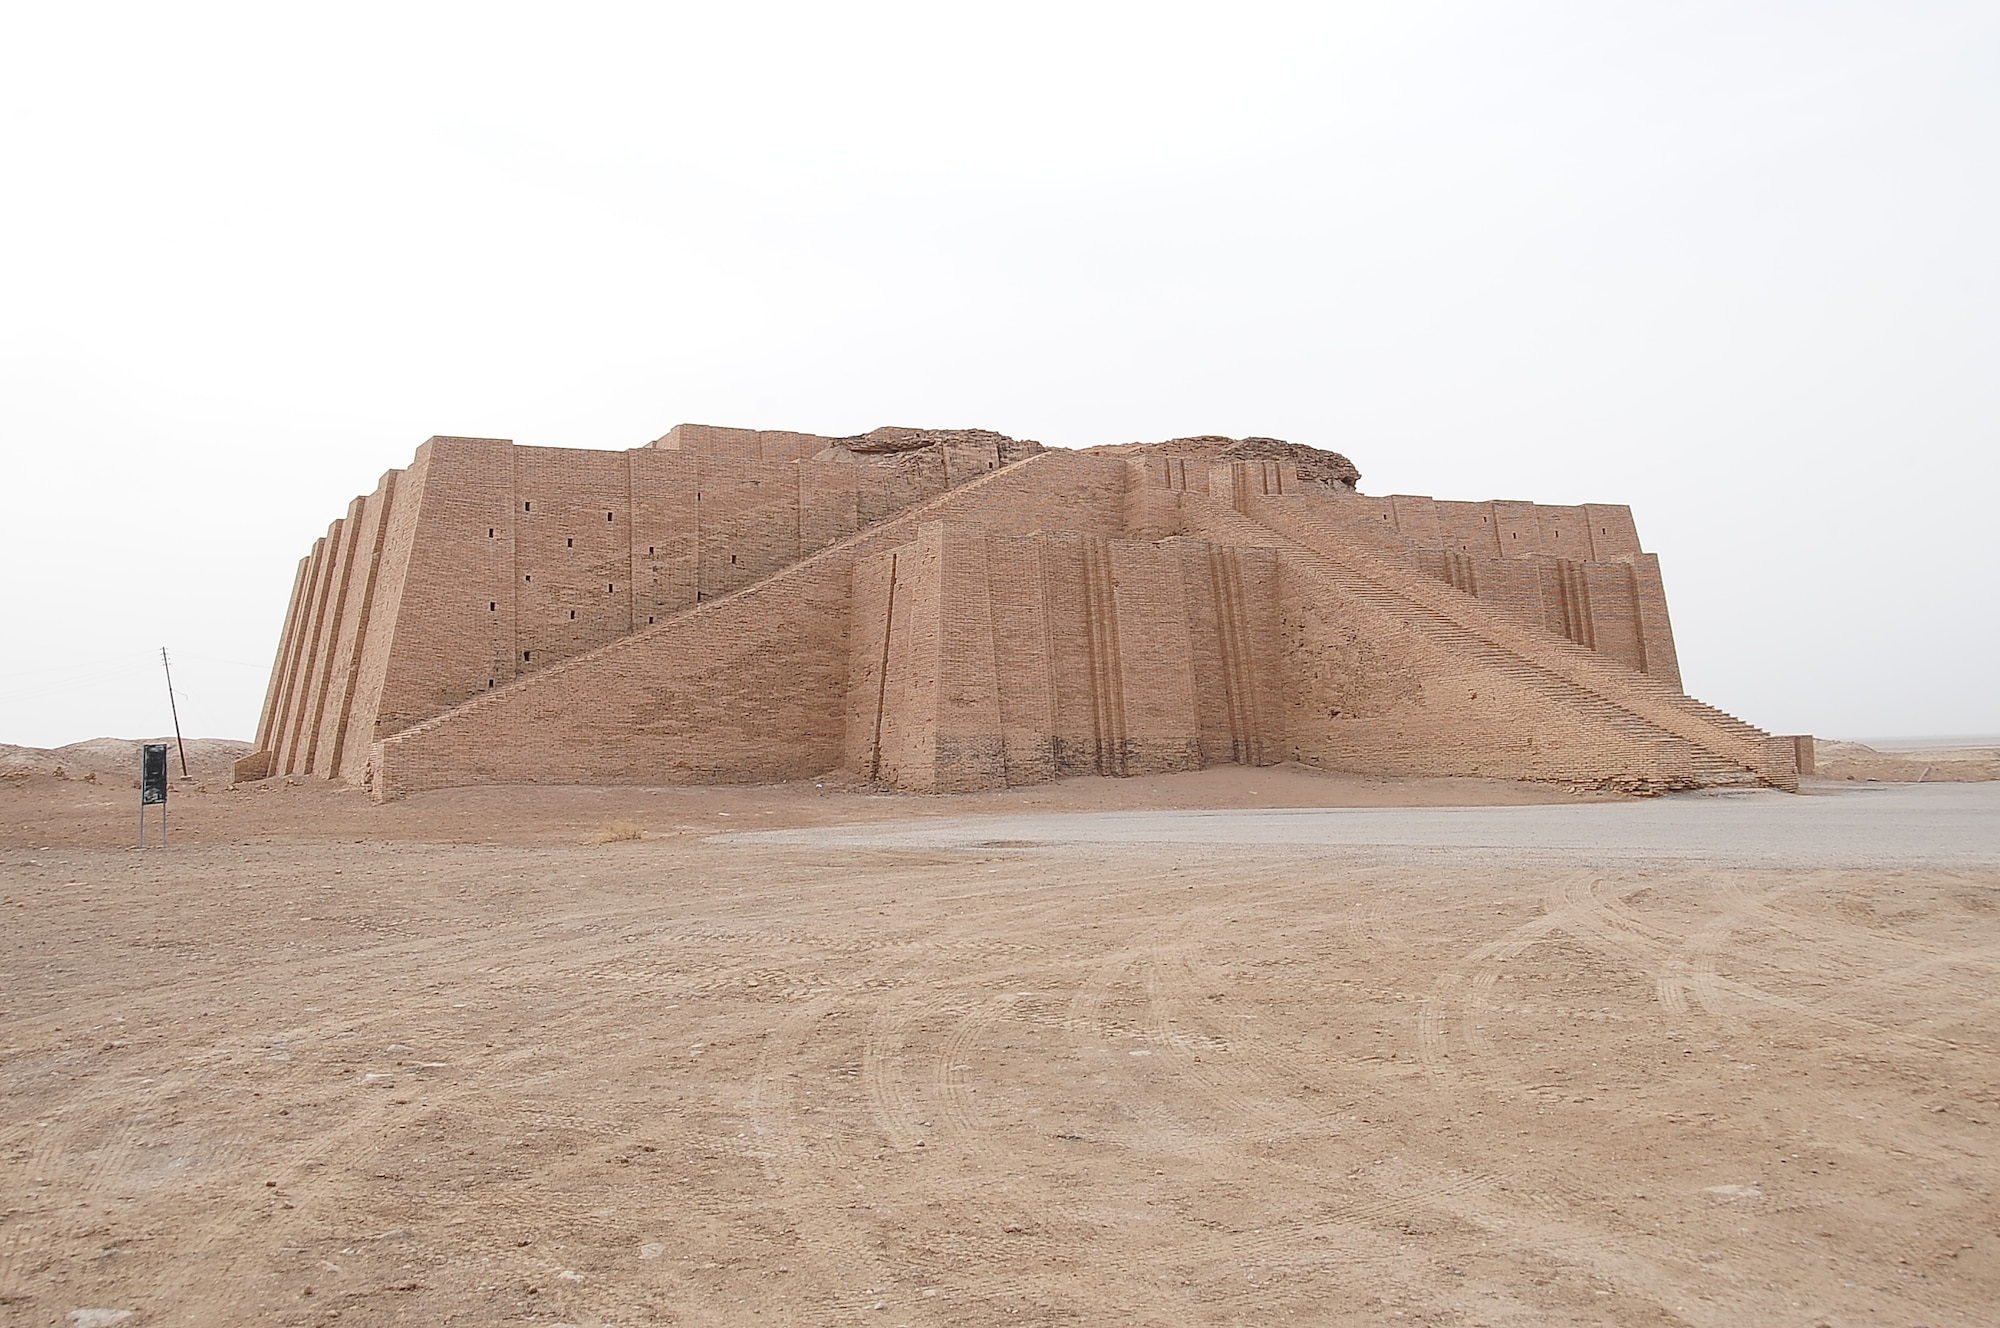 ALI BASE, Iraq – The Great Ziggurat of Ur stands after 4,000 years near Ali Base, Iraq.  The Ziggurat construction was finished in the 21st century BC by King Shulgi in the ancient Sumerian city of Ur in Mesopotamia, which is near An Nasiriyah in present-day Iraq.  Members of the 407th Air Expeditionary Group Chaplains Office offer three tours weekly of the Ziggurat and ruins of the city of Ur.  (U.S. Air Force photo/Staff Sgt. Christopher Marasky)